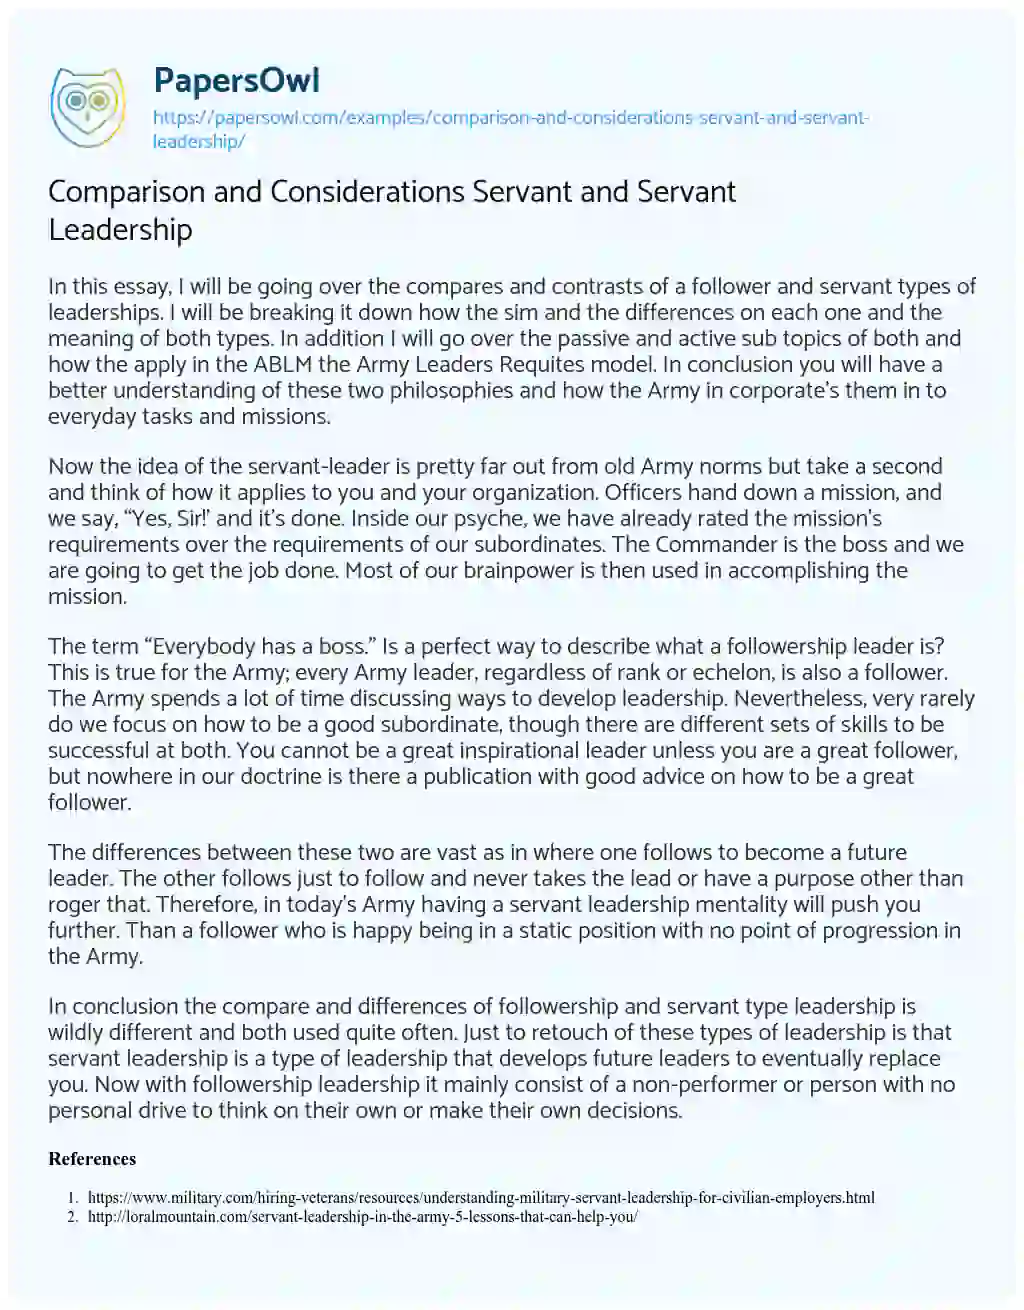 Essay on Comparison and Considerations Servant and Servant Leadership